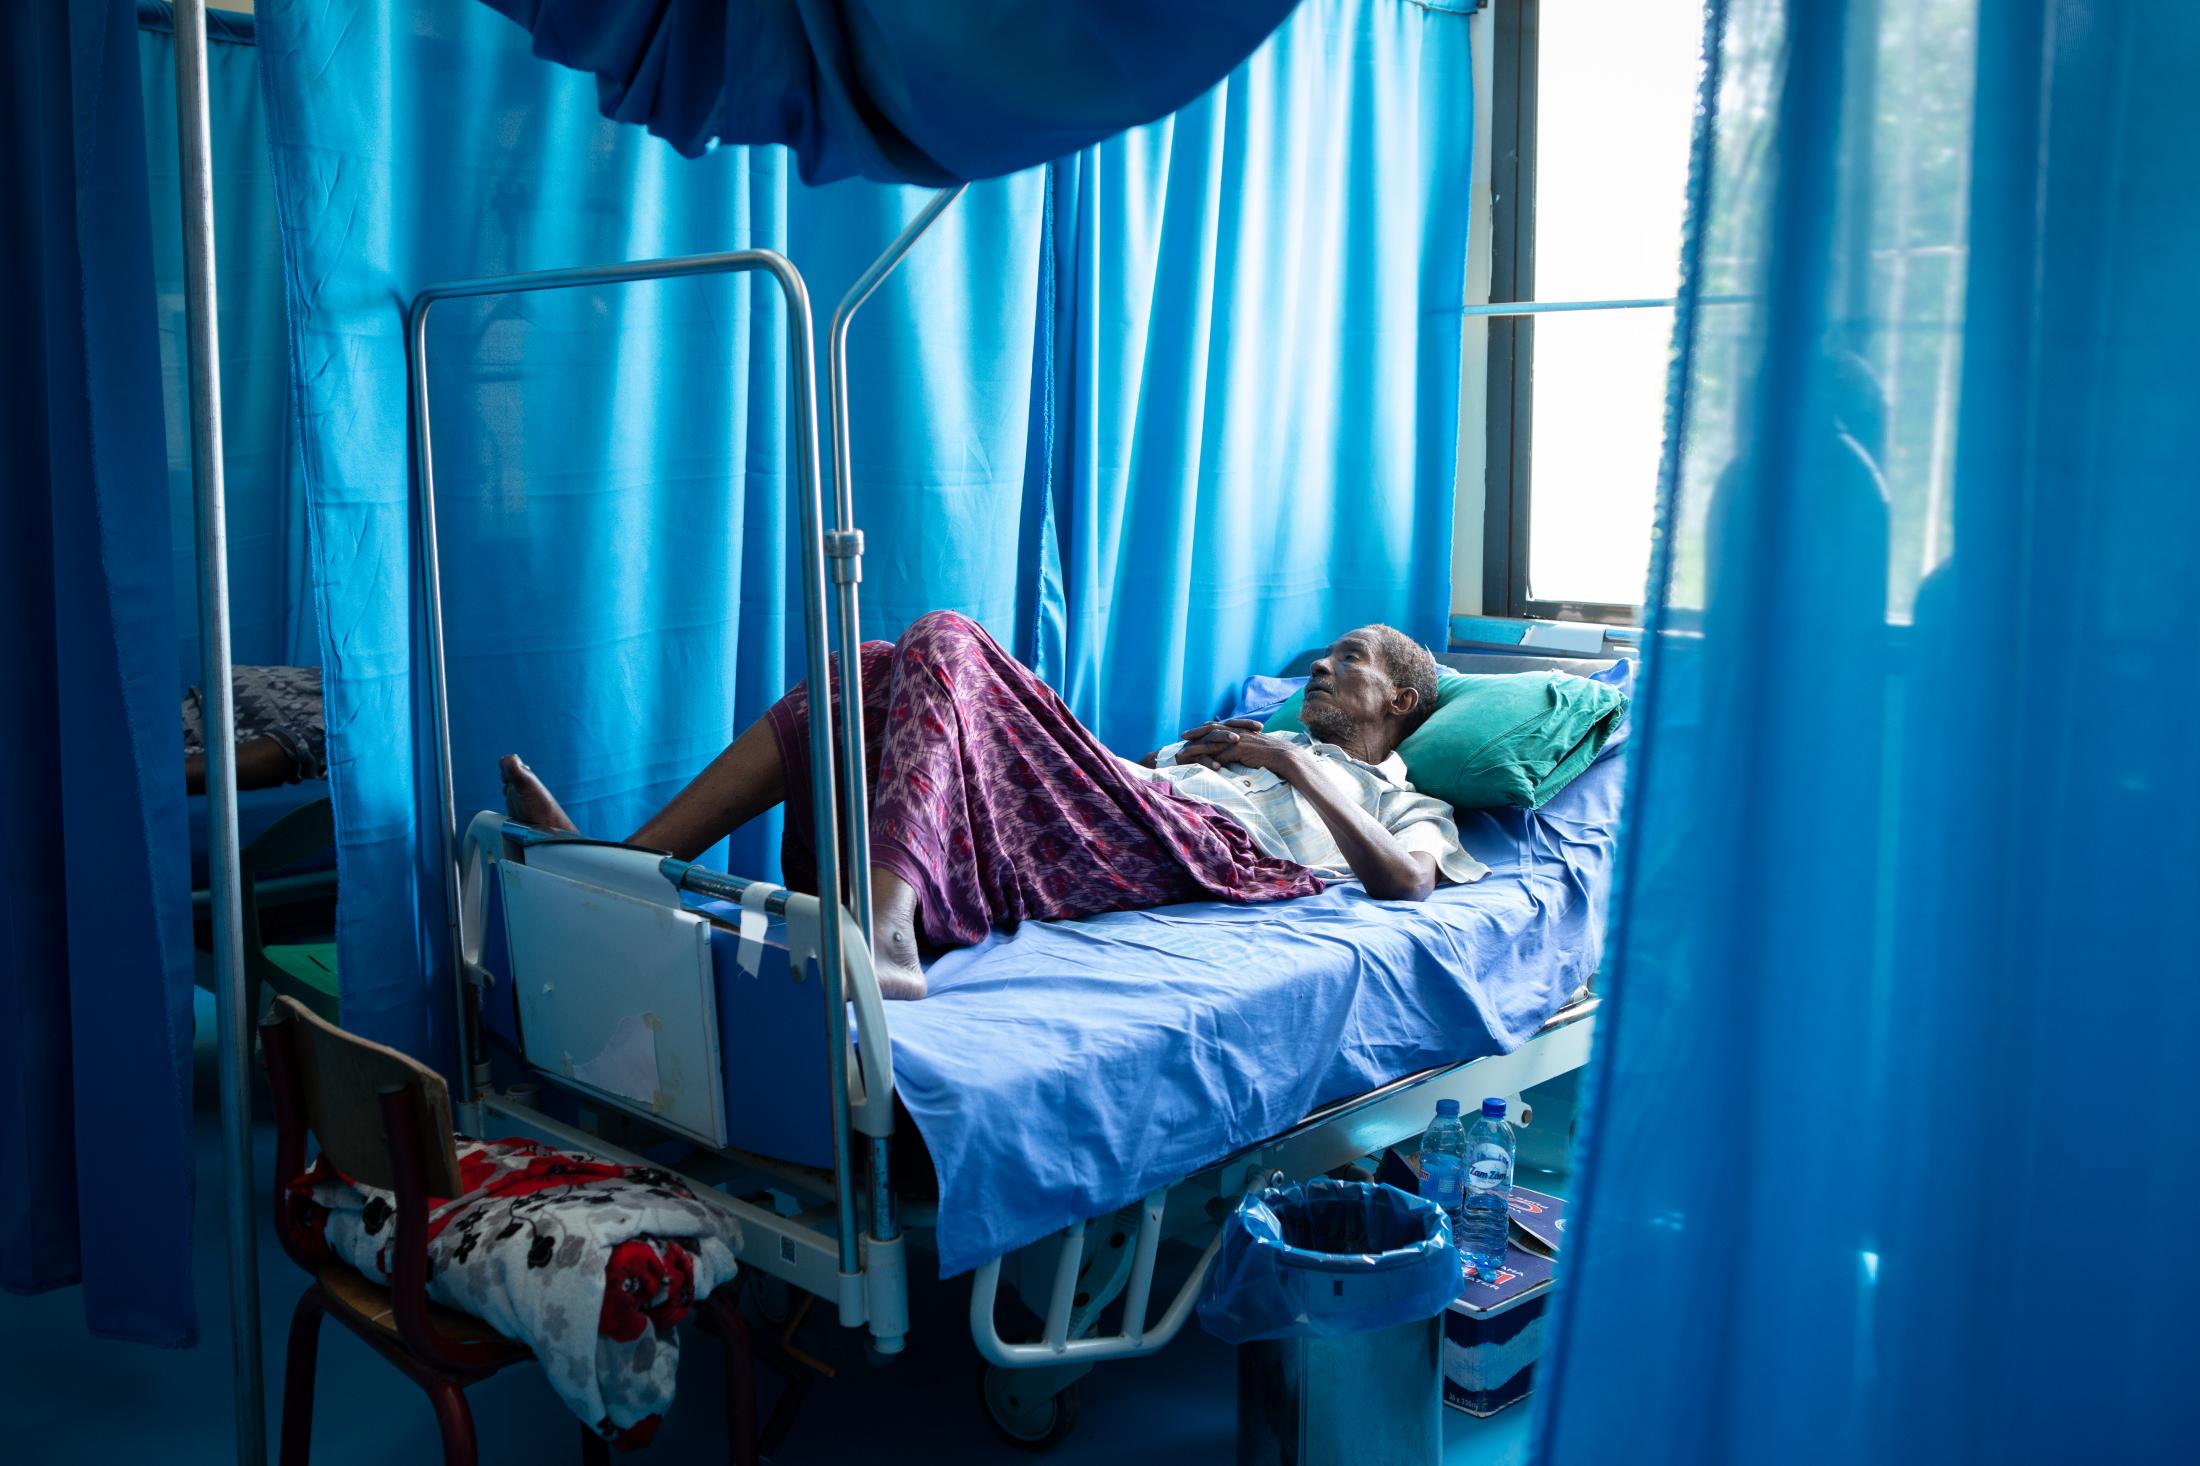 A day at a COVID -19 treatment centre in Somalia - An elderly man at the treatment ward recovering from...